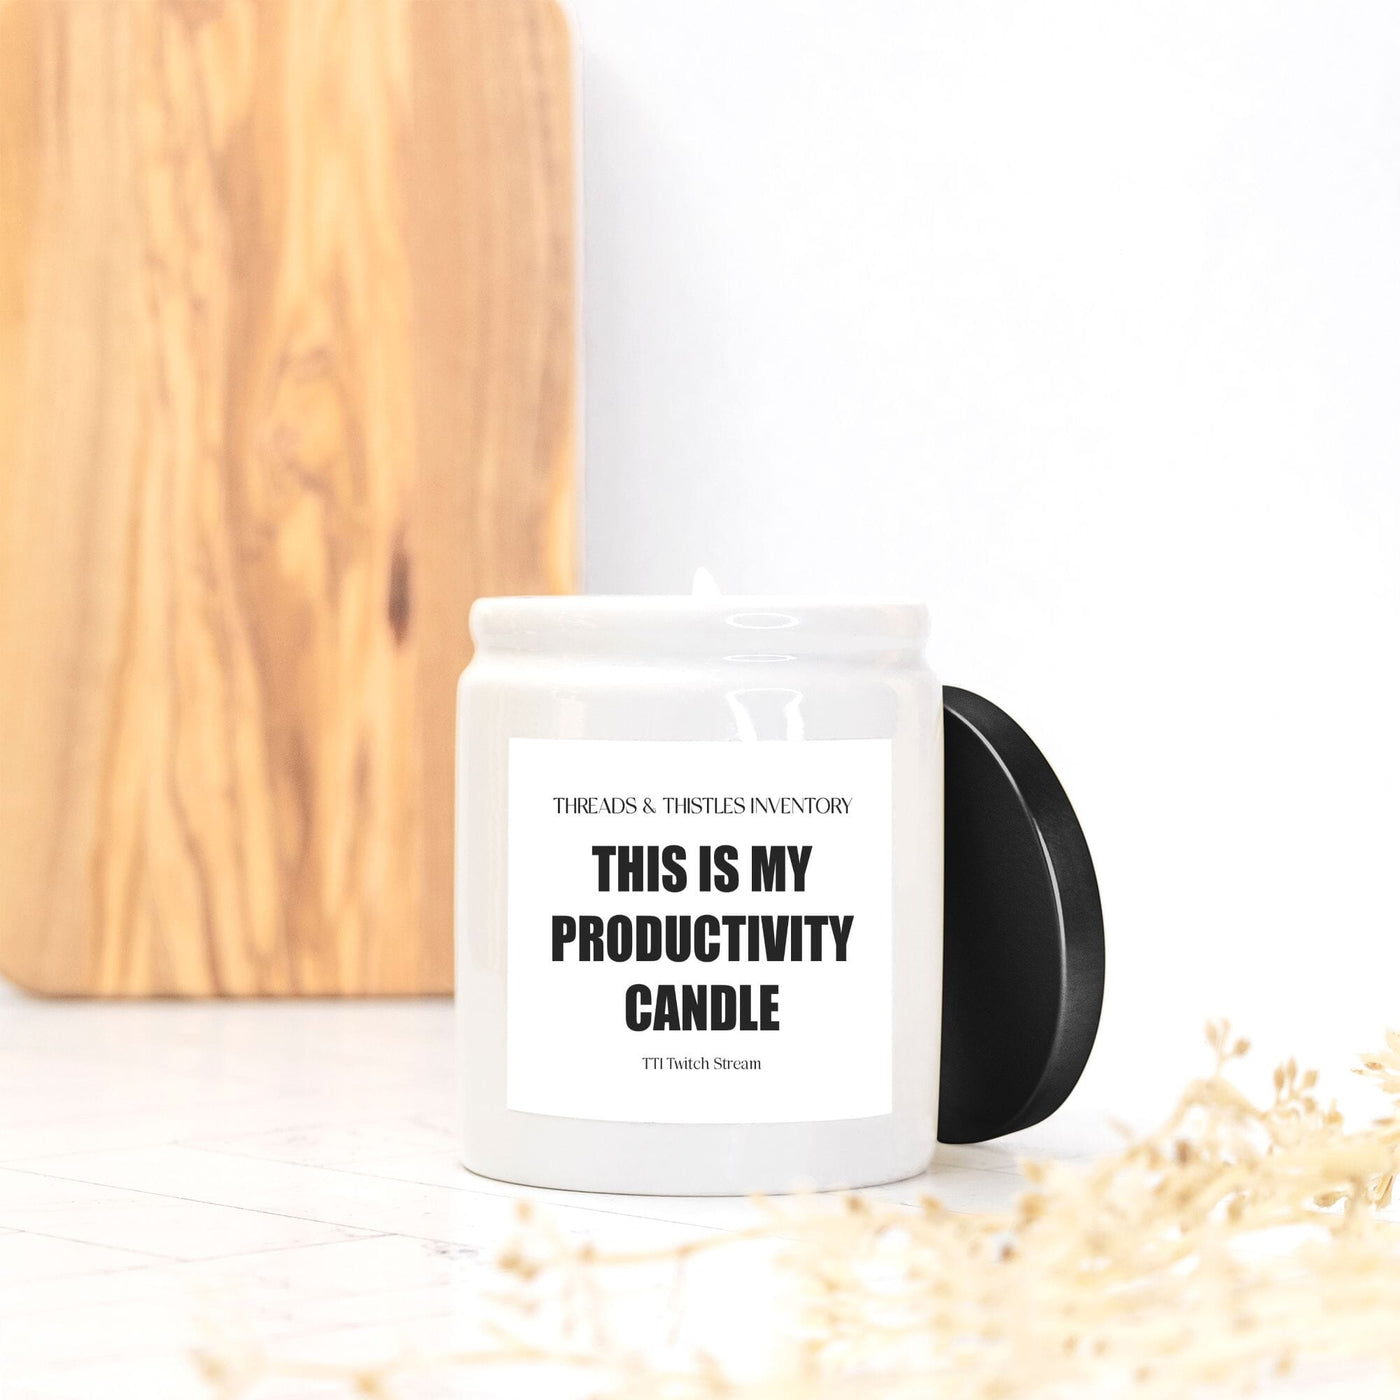 Productivity Candle | Candle Ceramic 8oz | TTI Stream Candles Threads & Thistles Inventory 